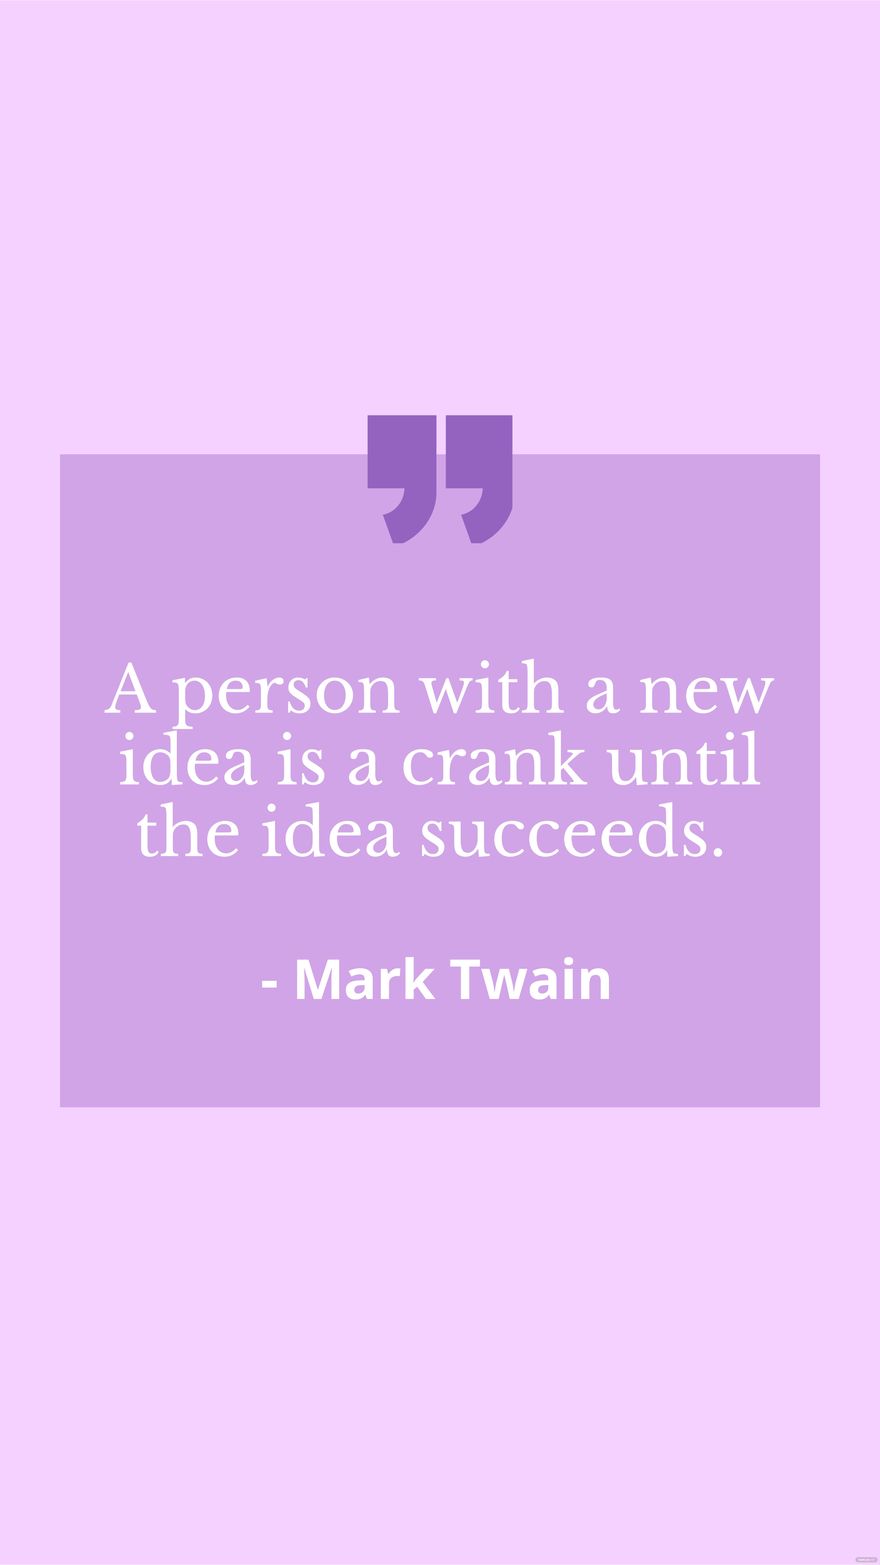 Mark Twain - A person with a new idea is a crank until the idea succeeds.